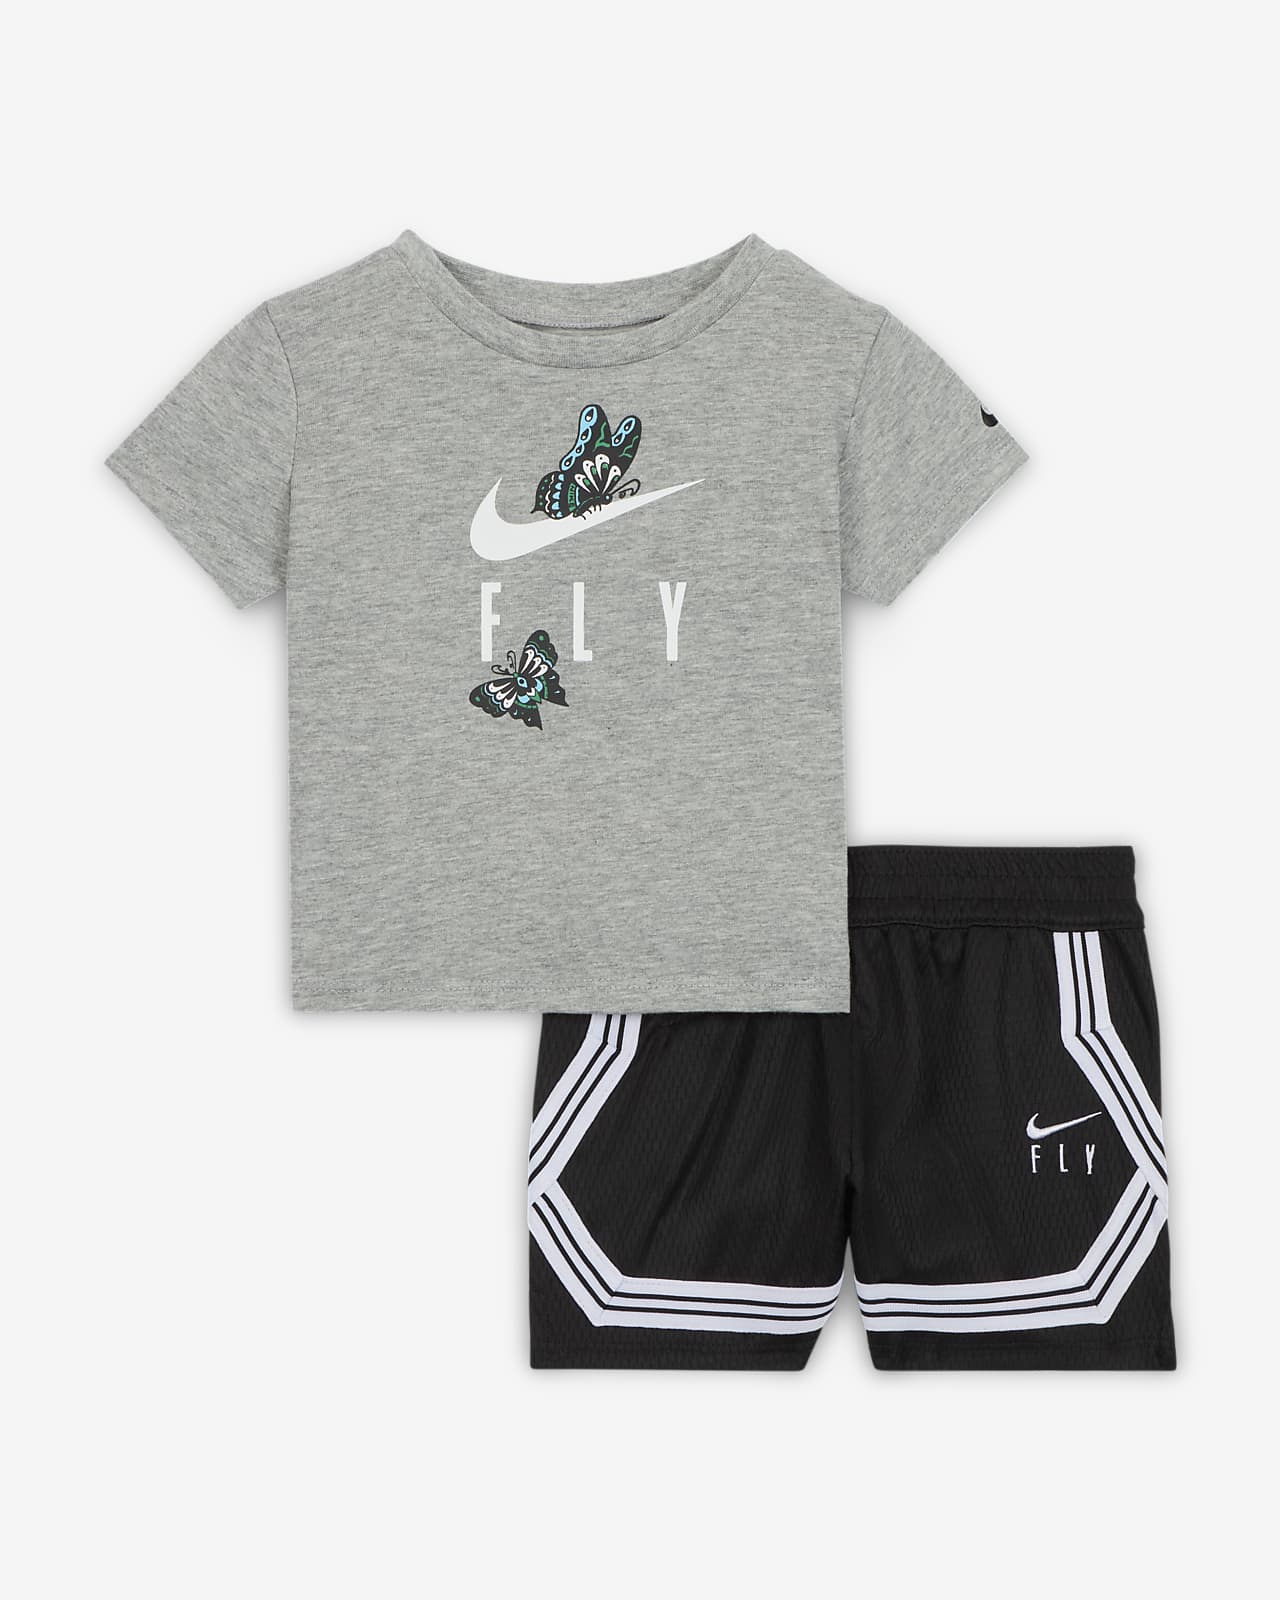 Nike Dry-FIT Fly Crossover Baby (12-24M) 2-Piece T-Shirt Set